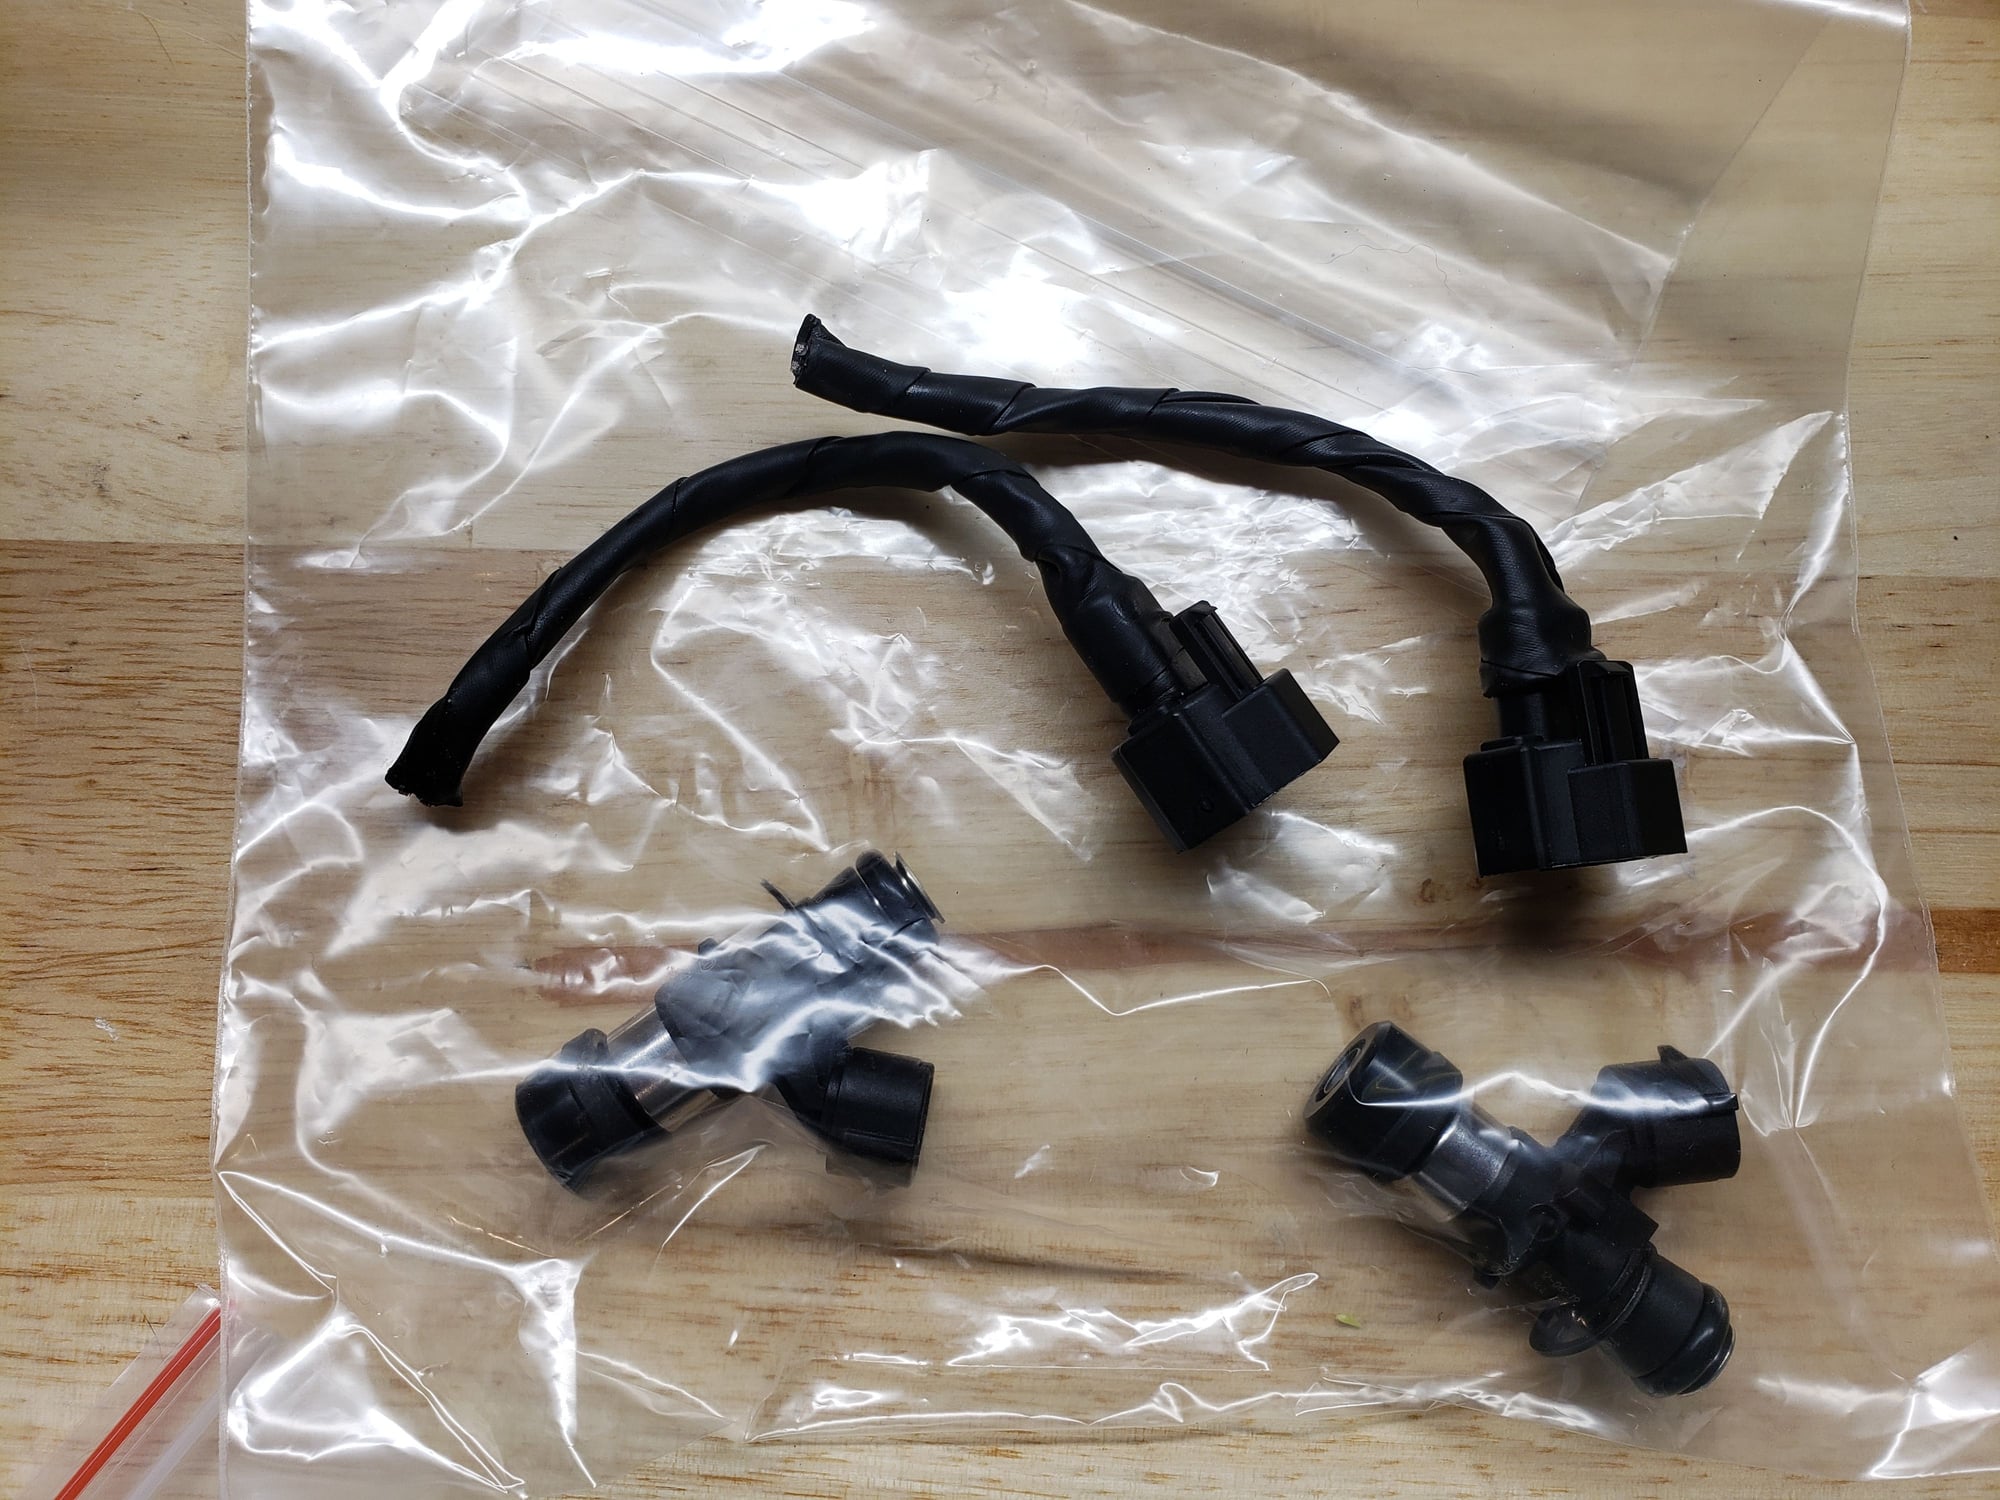 Engine - Intake/Fuel - RP fuel rail (modified) and Bosch 2200's - Used - 1993 to 1995 Mazda RX-7 - Richmond, VA 23235, United States